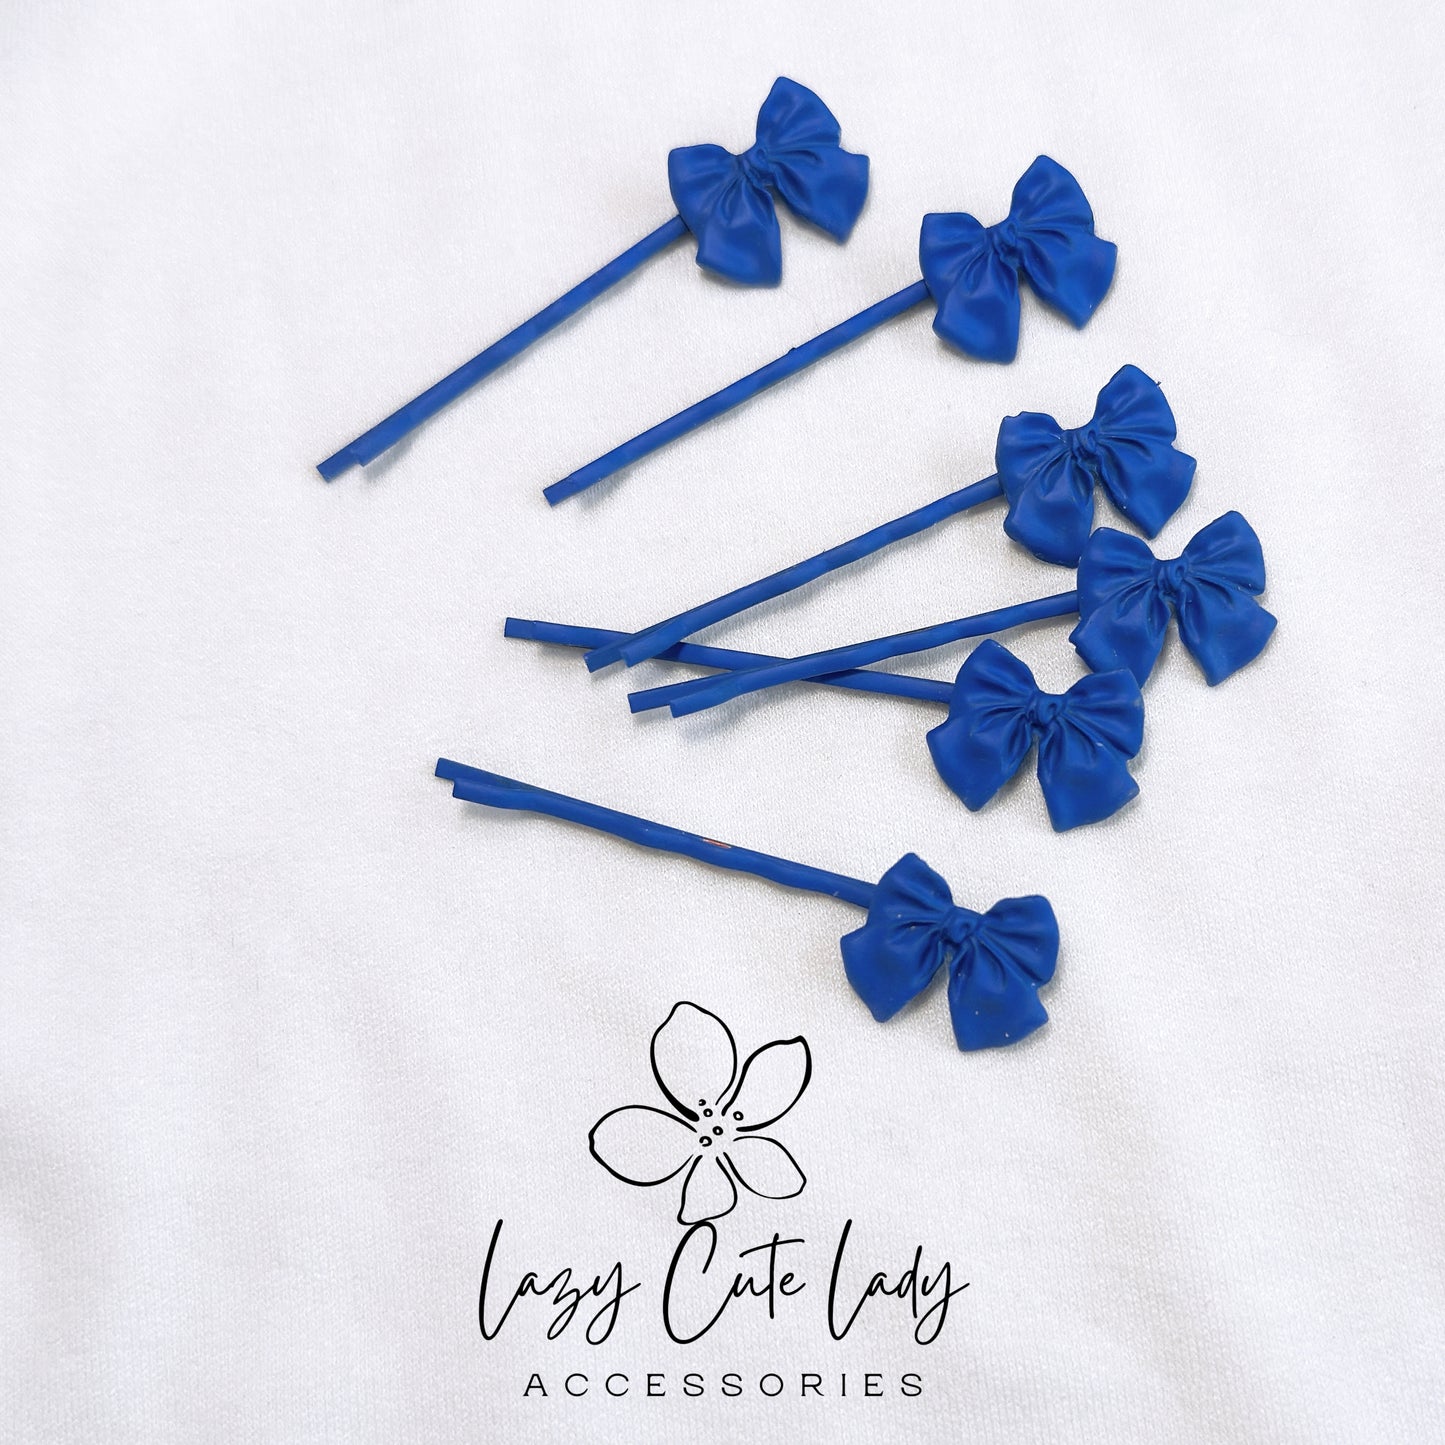 Colorful Metal Bow Hair Pin - Available in Blue and Red (2.25 Inches)